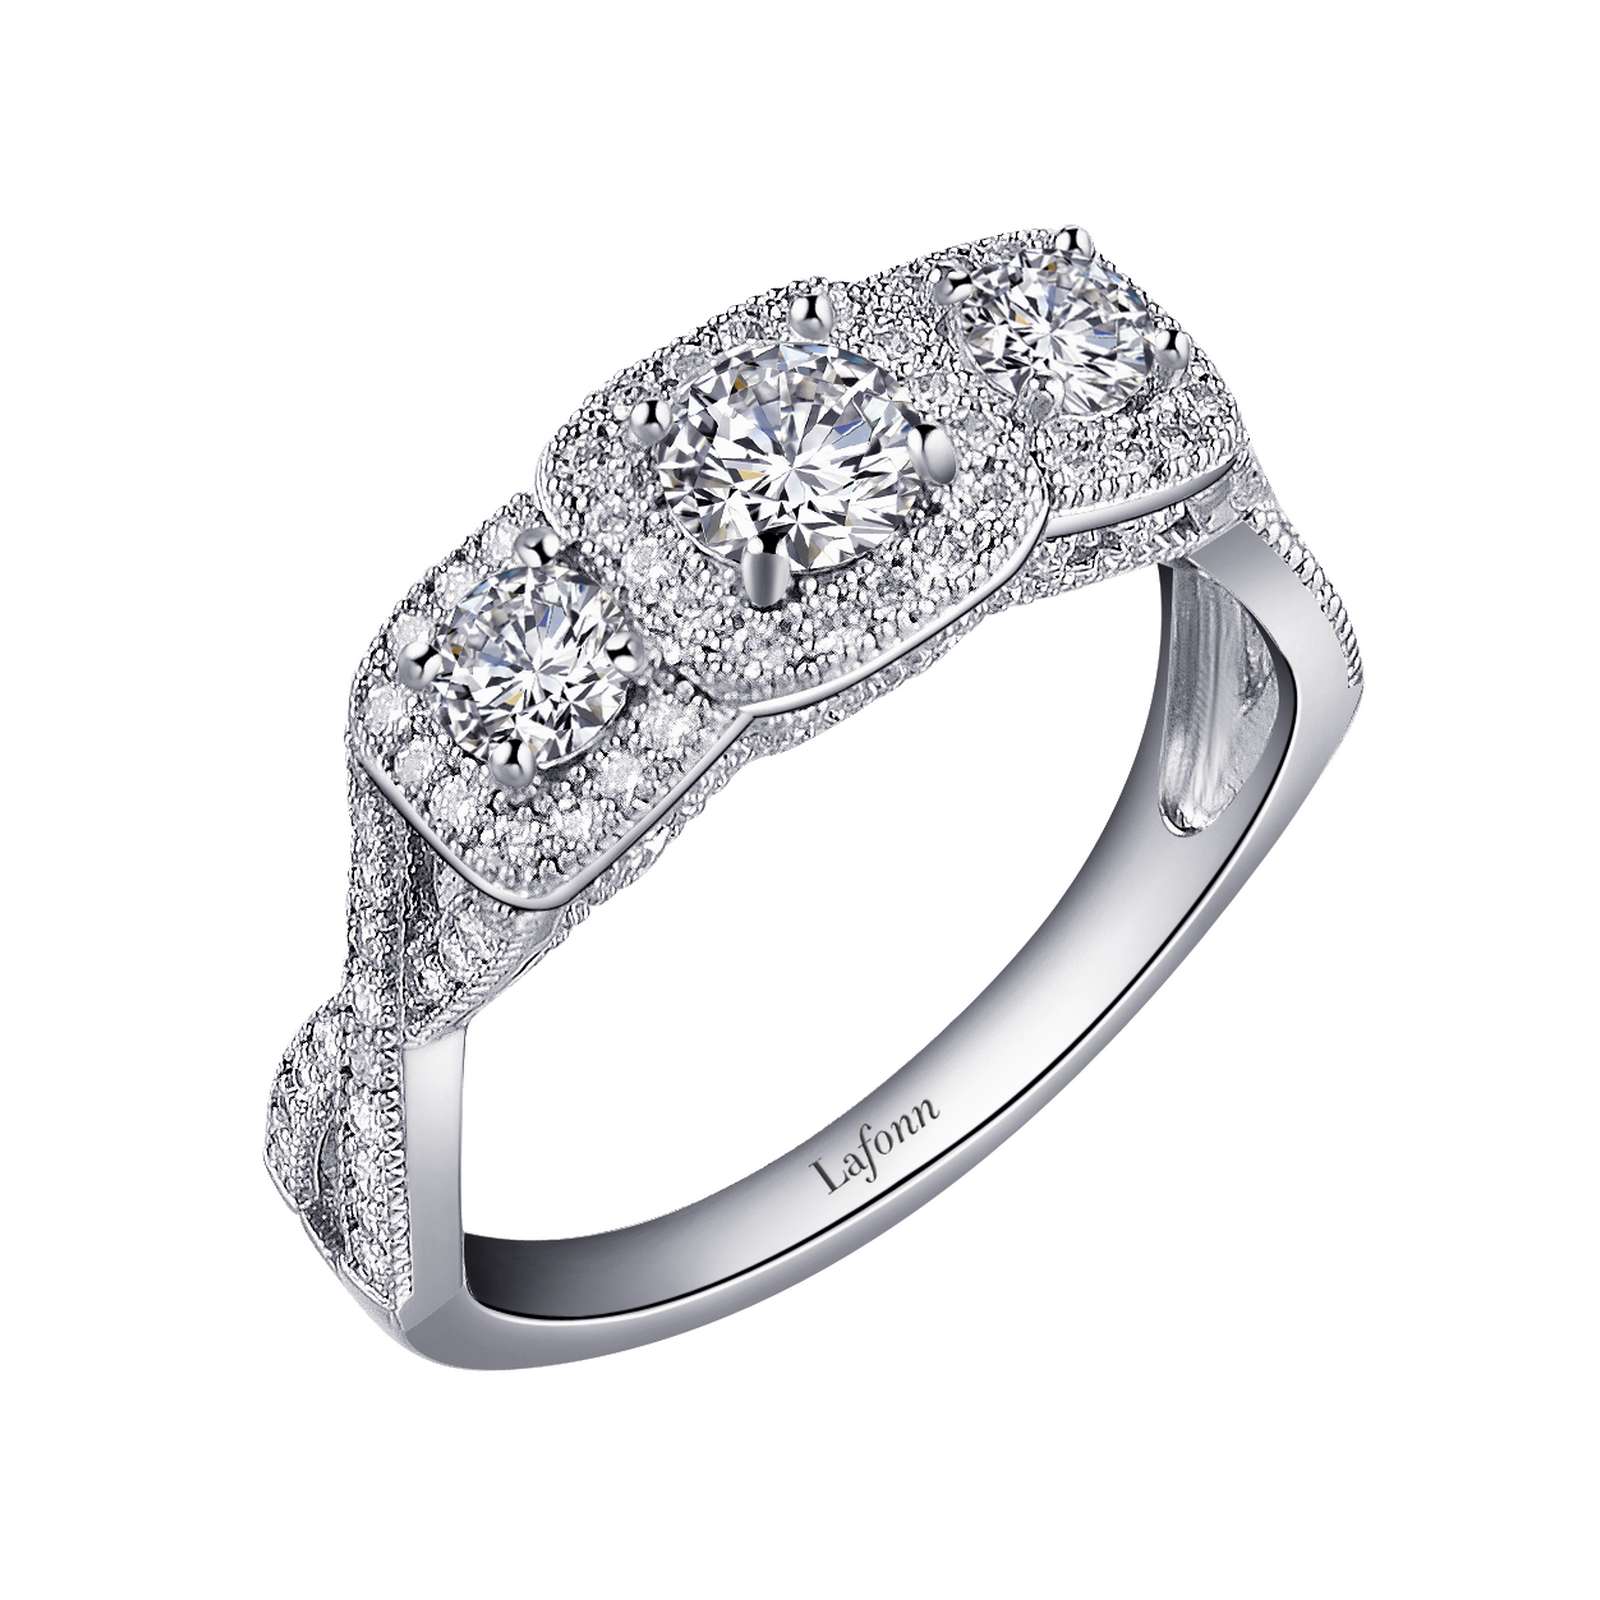 Three-Stone Halo Engagement Ring Griner Jewelry Co. Moultrie, GA